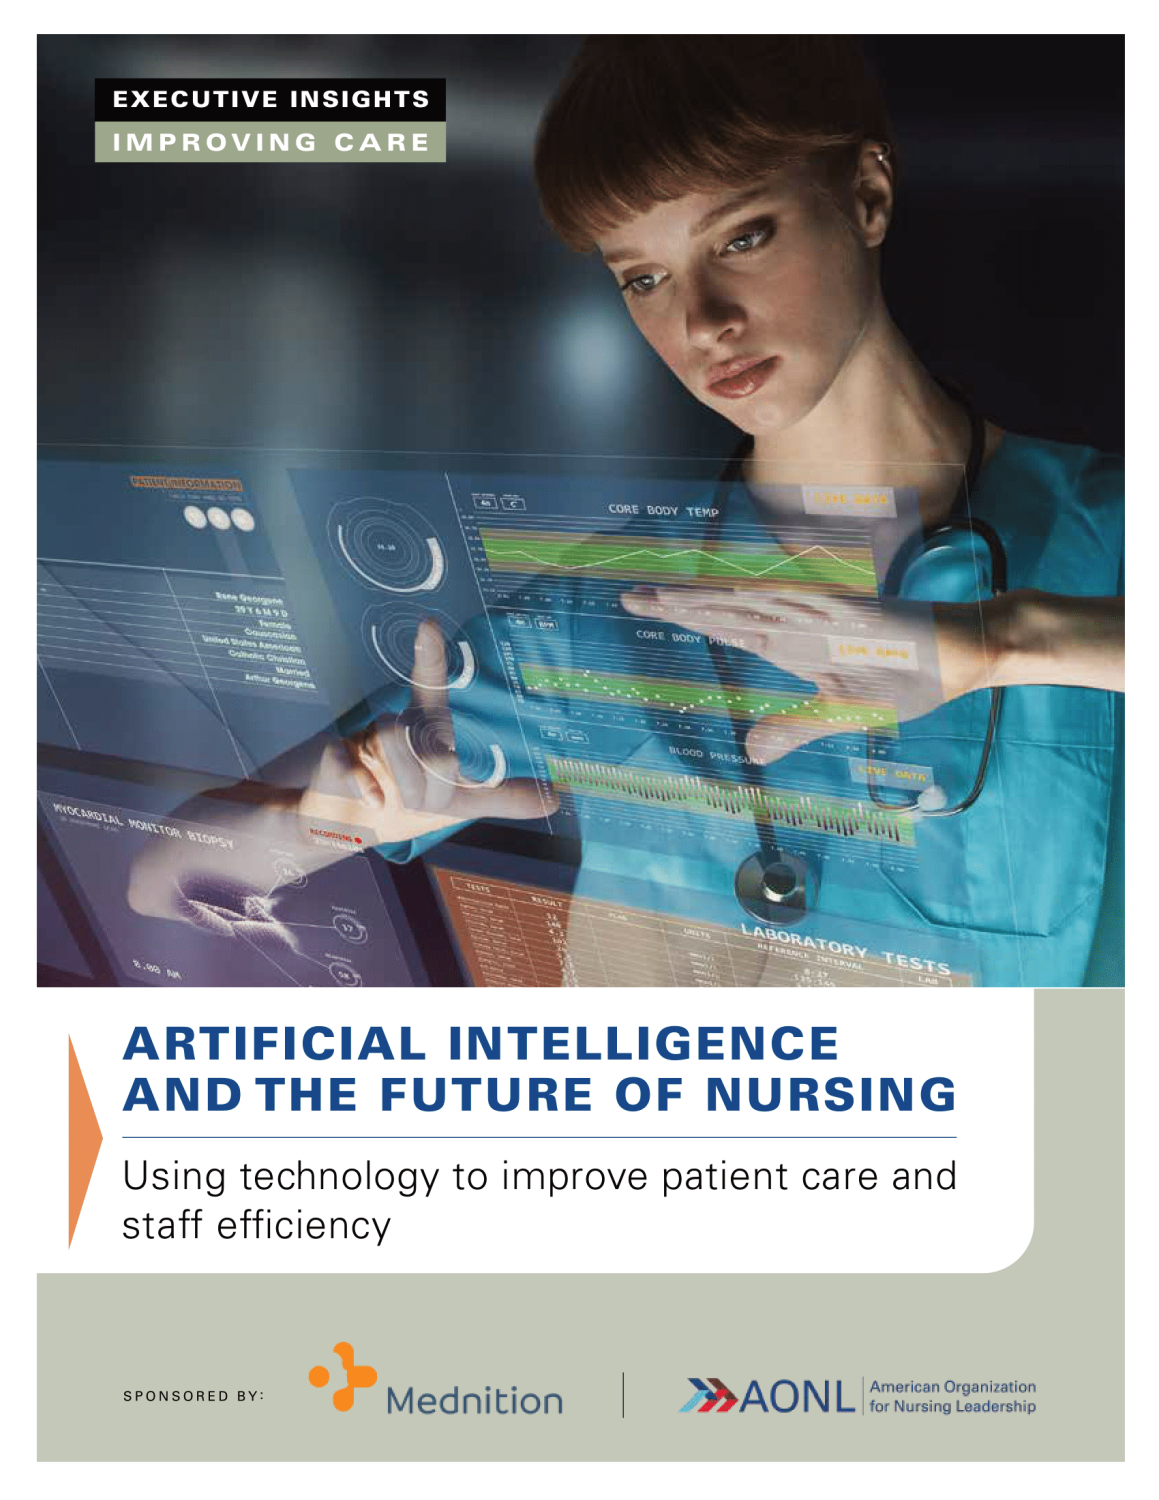 Executive Dialogue | Artificial Intelligence and the Future of Nursing:Using technology to improve patient care and staff efficiency